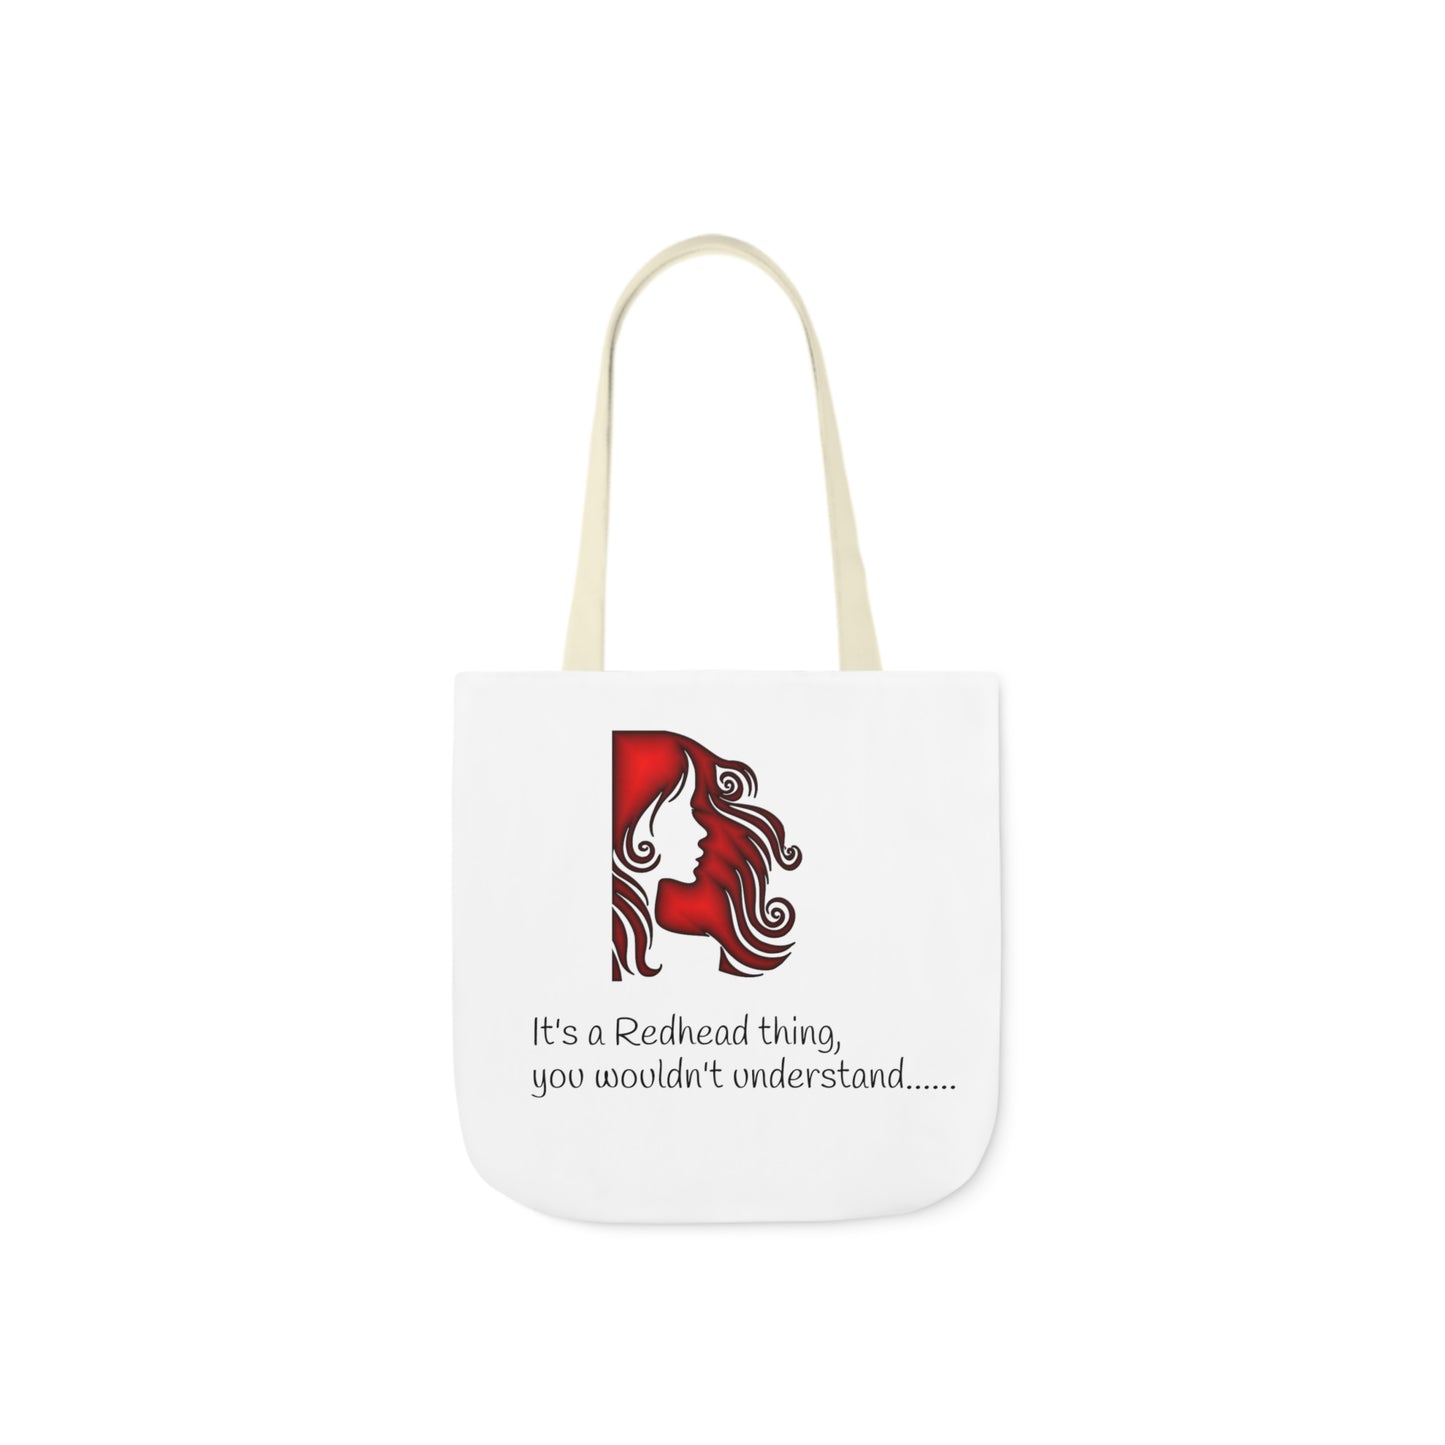 It's a Redhead thing, you wouldn't understand.... - Canvas Tote Bag